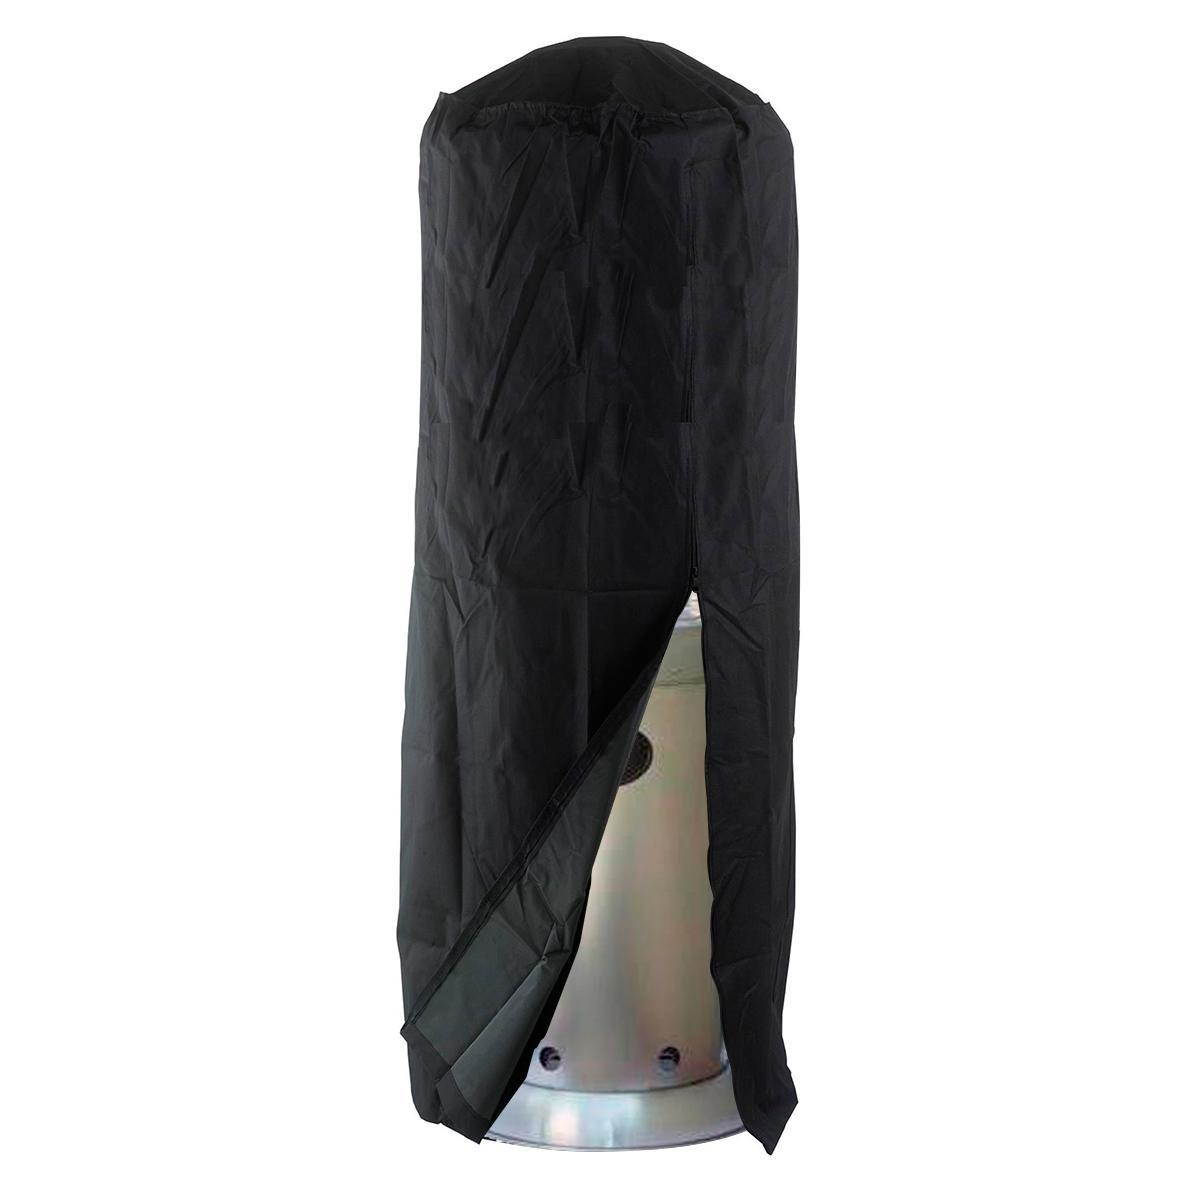 Heater Cover Patio Heater Covers With 2 Year Warranty pertaining to proportions 1200 X 1200